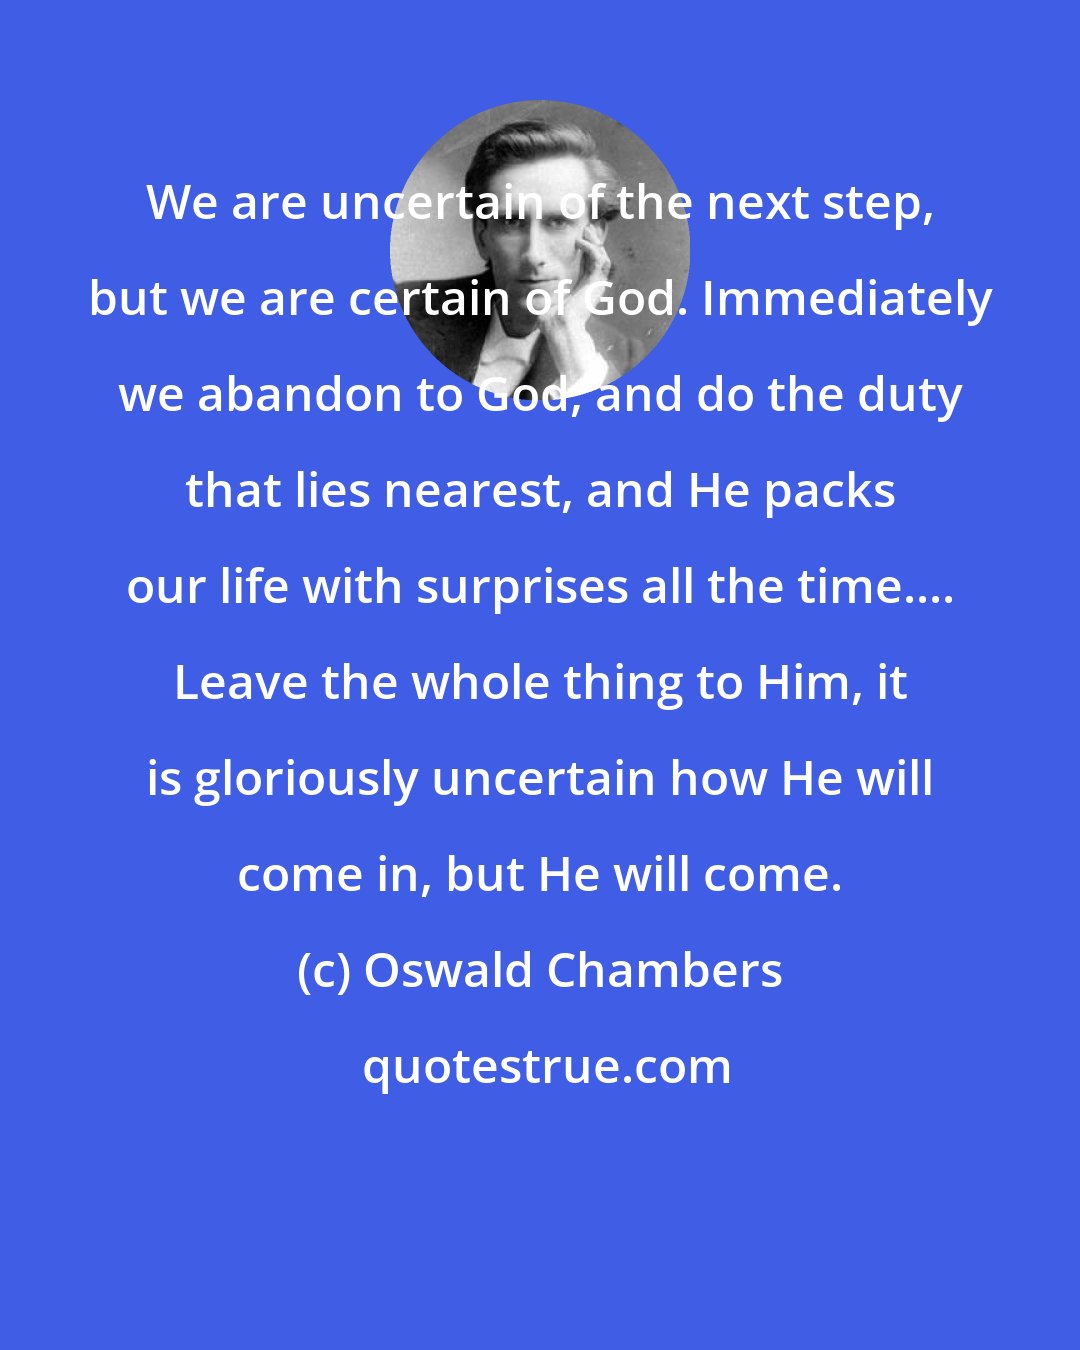 Oswald Chambers: We are uncertain of the next step, but we are certain of God. Immediately we abandon to God, and do the duty that lies nearest, and He packs our life with surprises all the time.... Leave the whole thing to Him, it is gloriously uncertain how He will come in, but He will come.